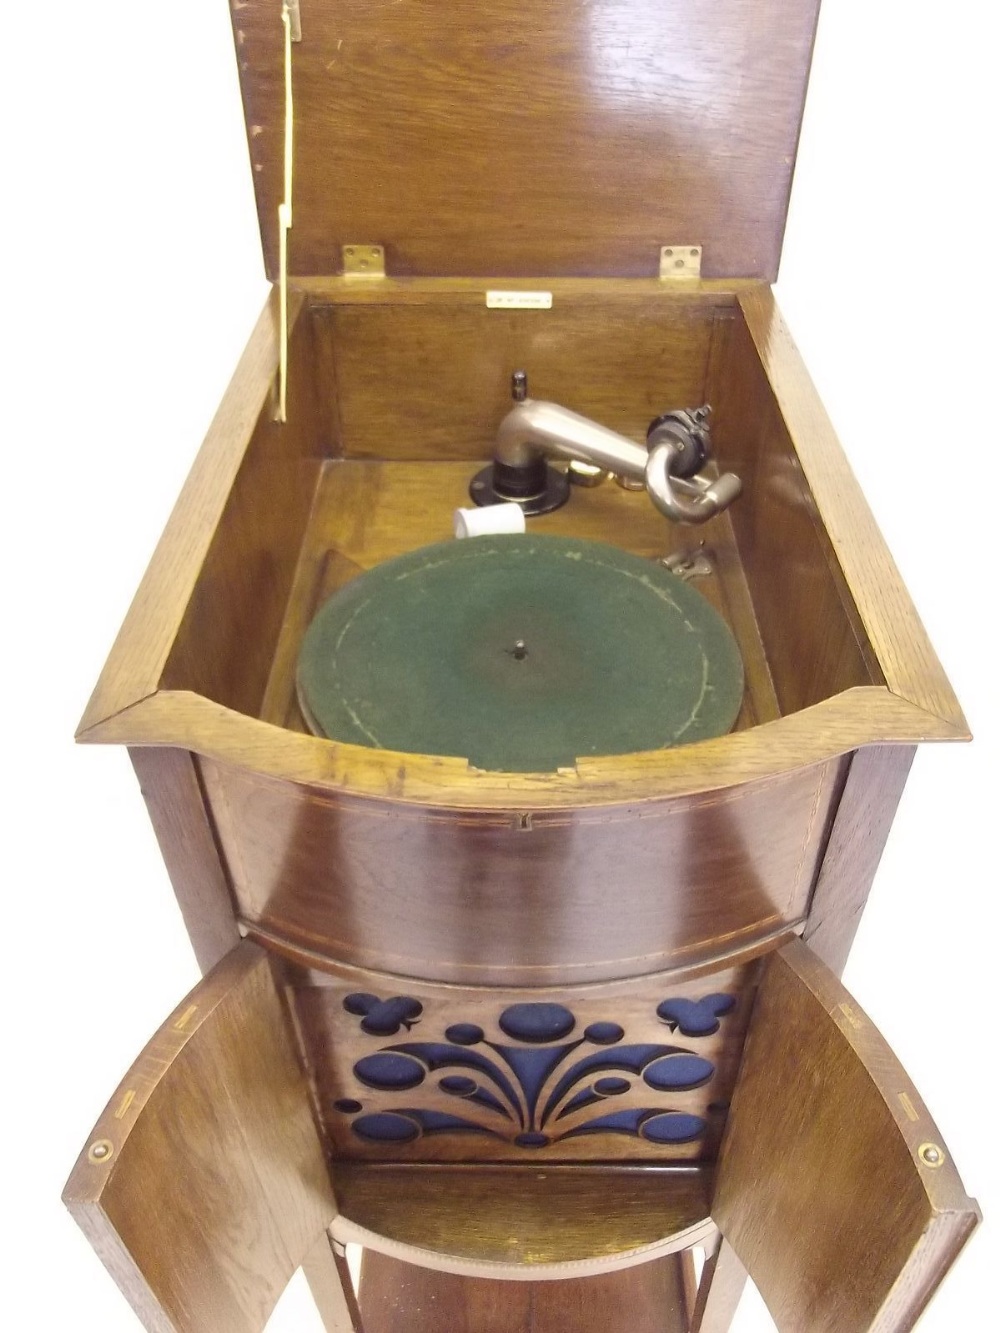 An HMV gramophone in floor standing oak case with inlay, and Exhibition style speakers - Image 2 of 3